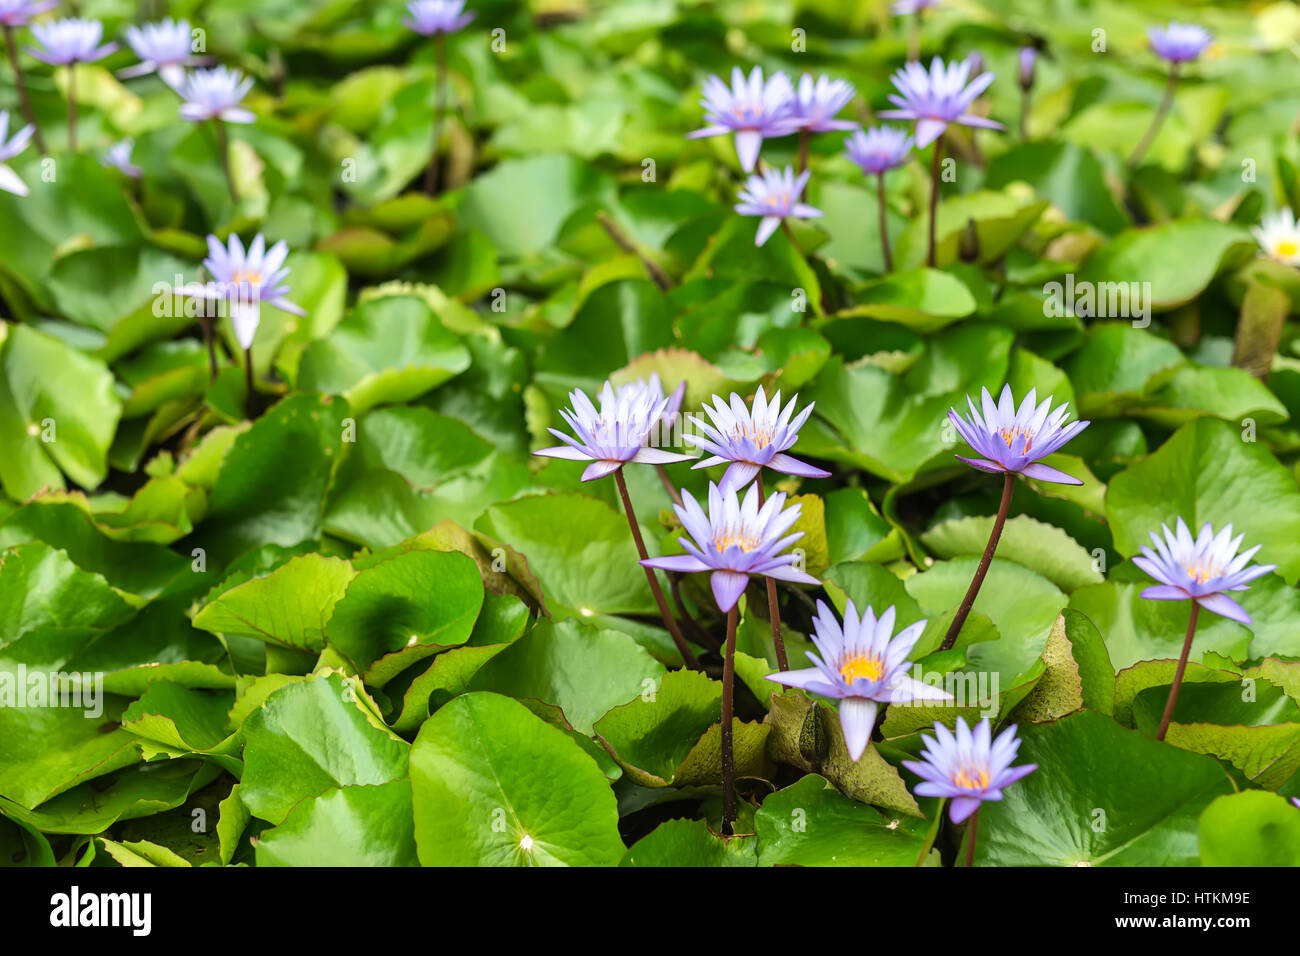 Blooming violet flowers of the water lily and green leaves in the Cloud Forest in Singapore. Closeup photo. Horizontal. Stock Photo